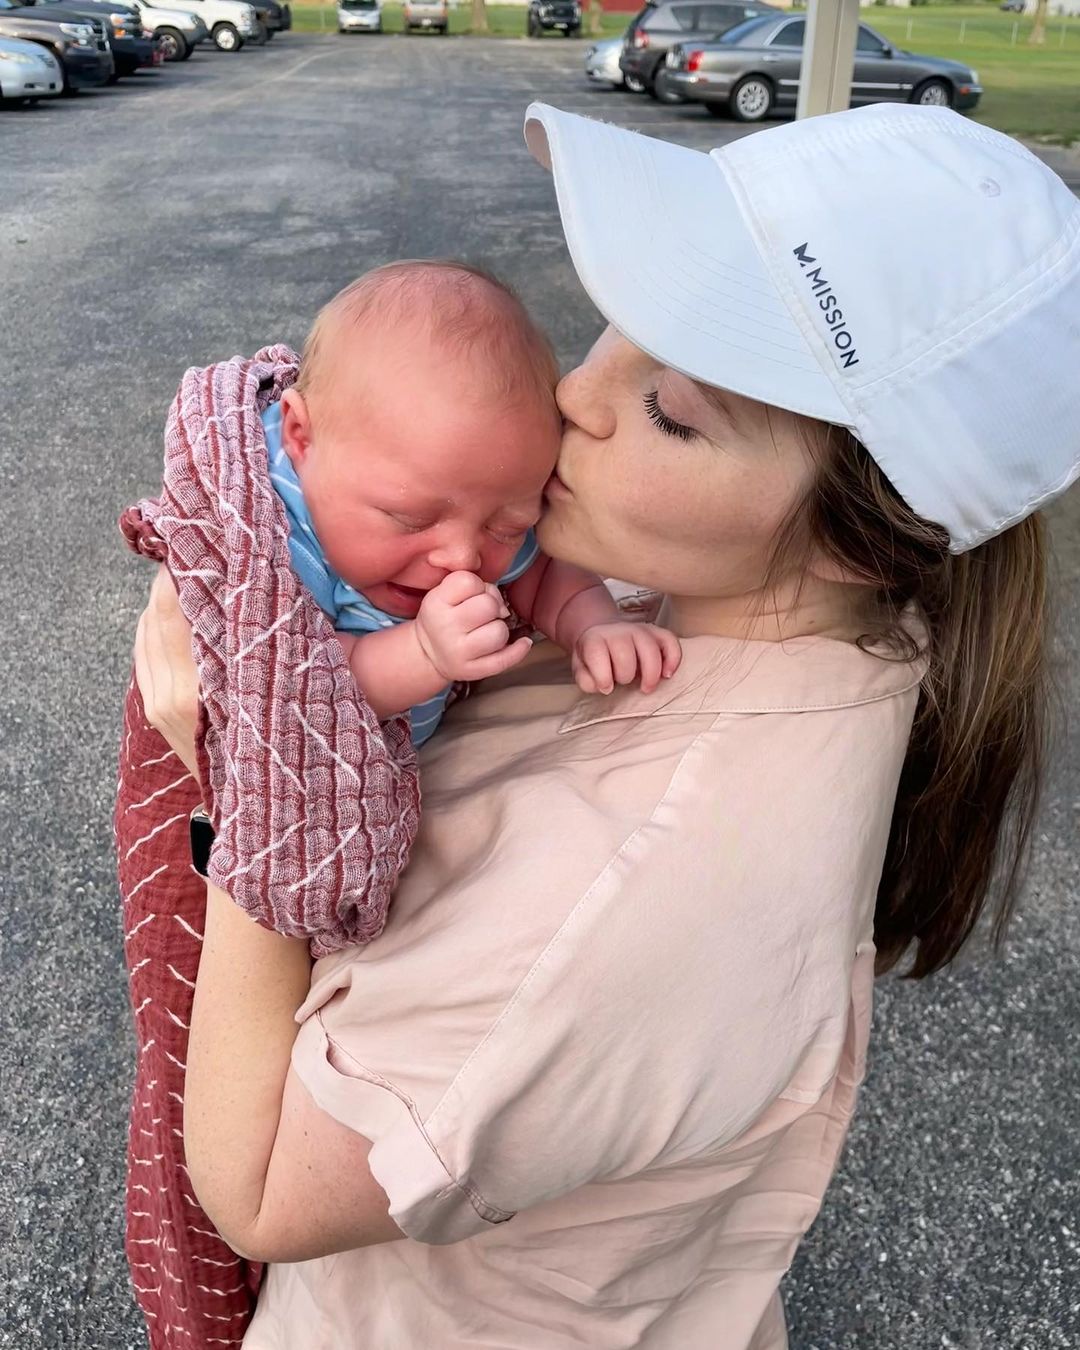 Some online critics accused Joy-Anna of ‘bad’ parenting after they believed she wasn't supporting Gunner's head in a recent photo